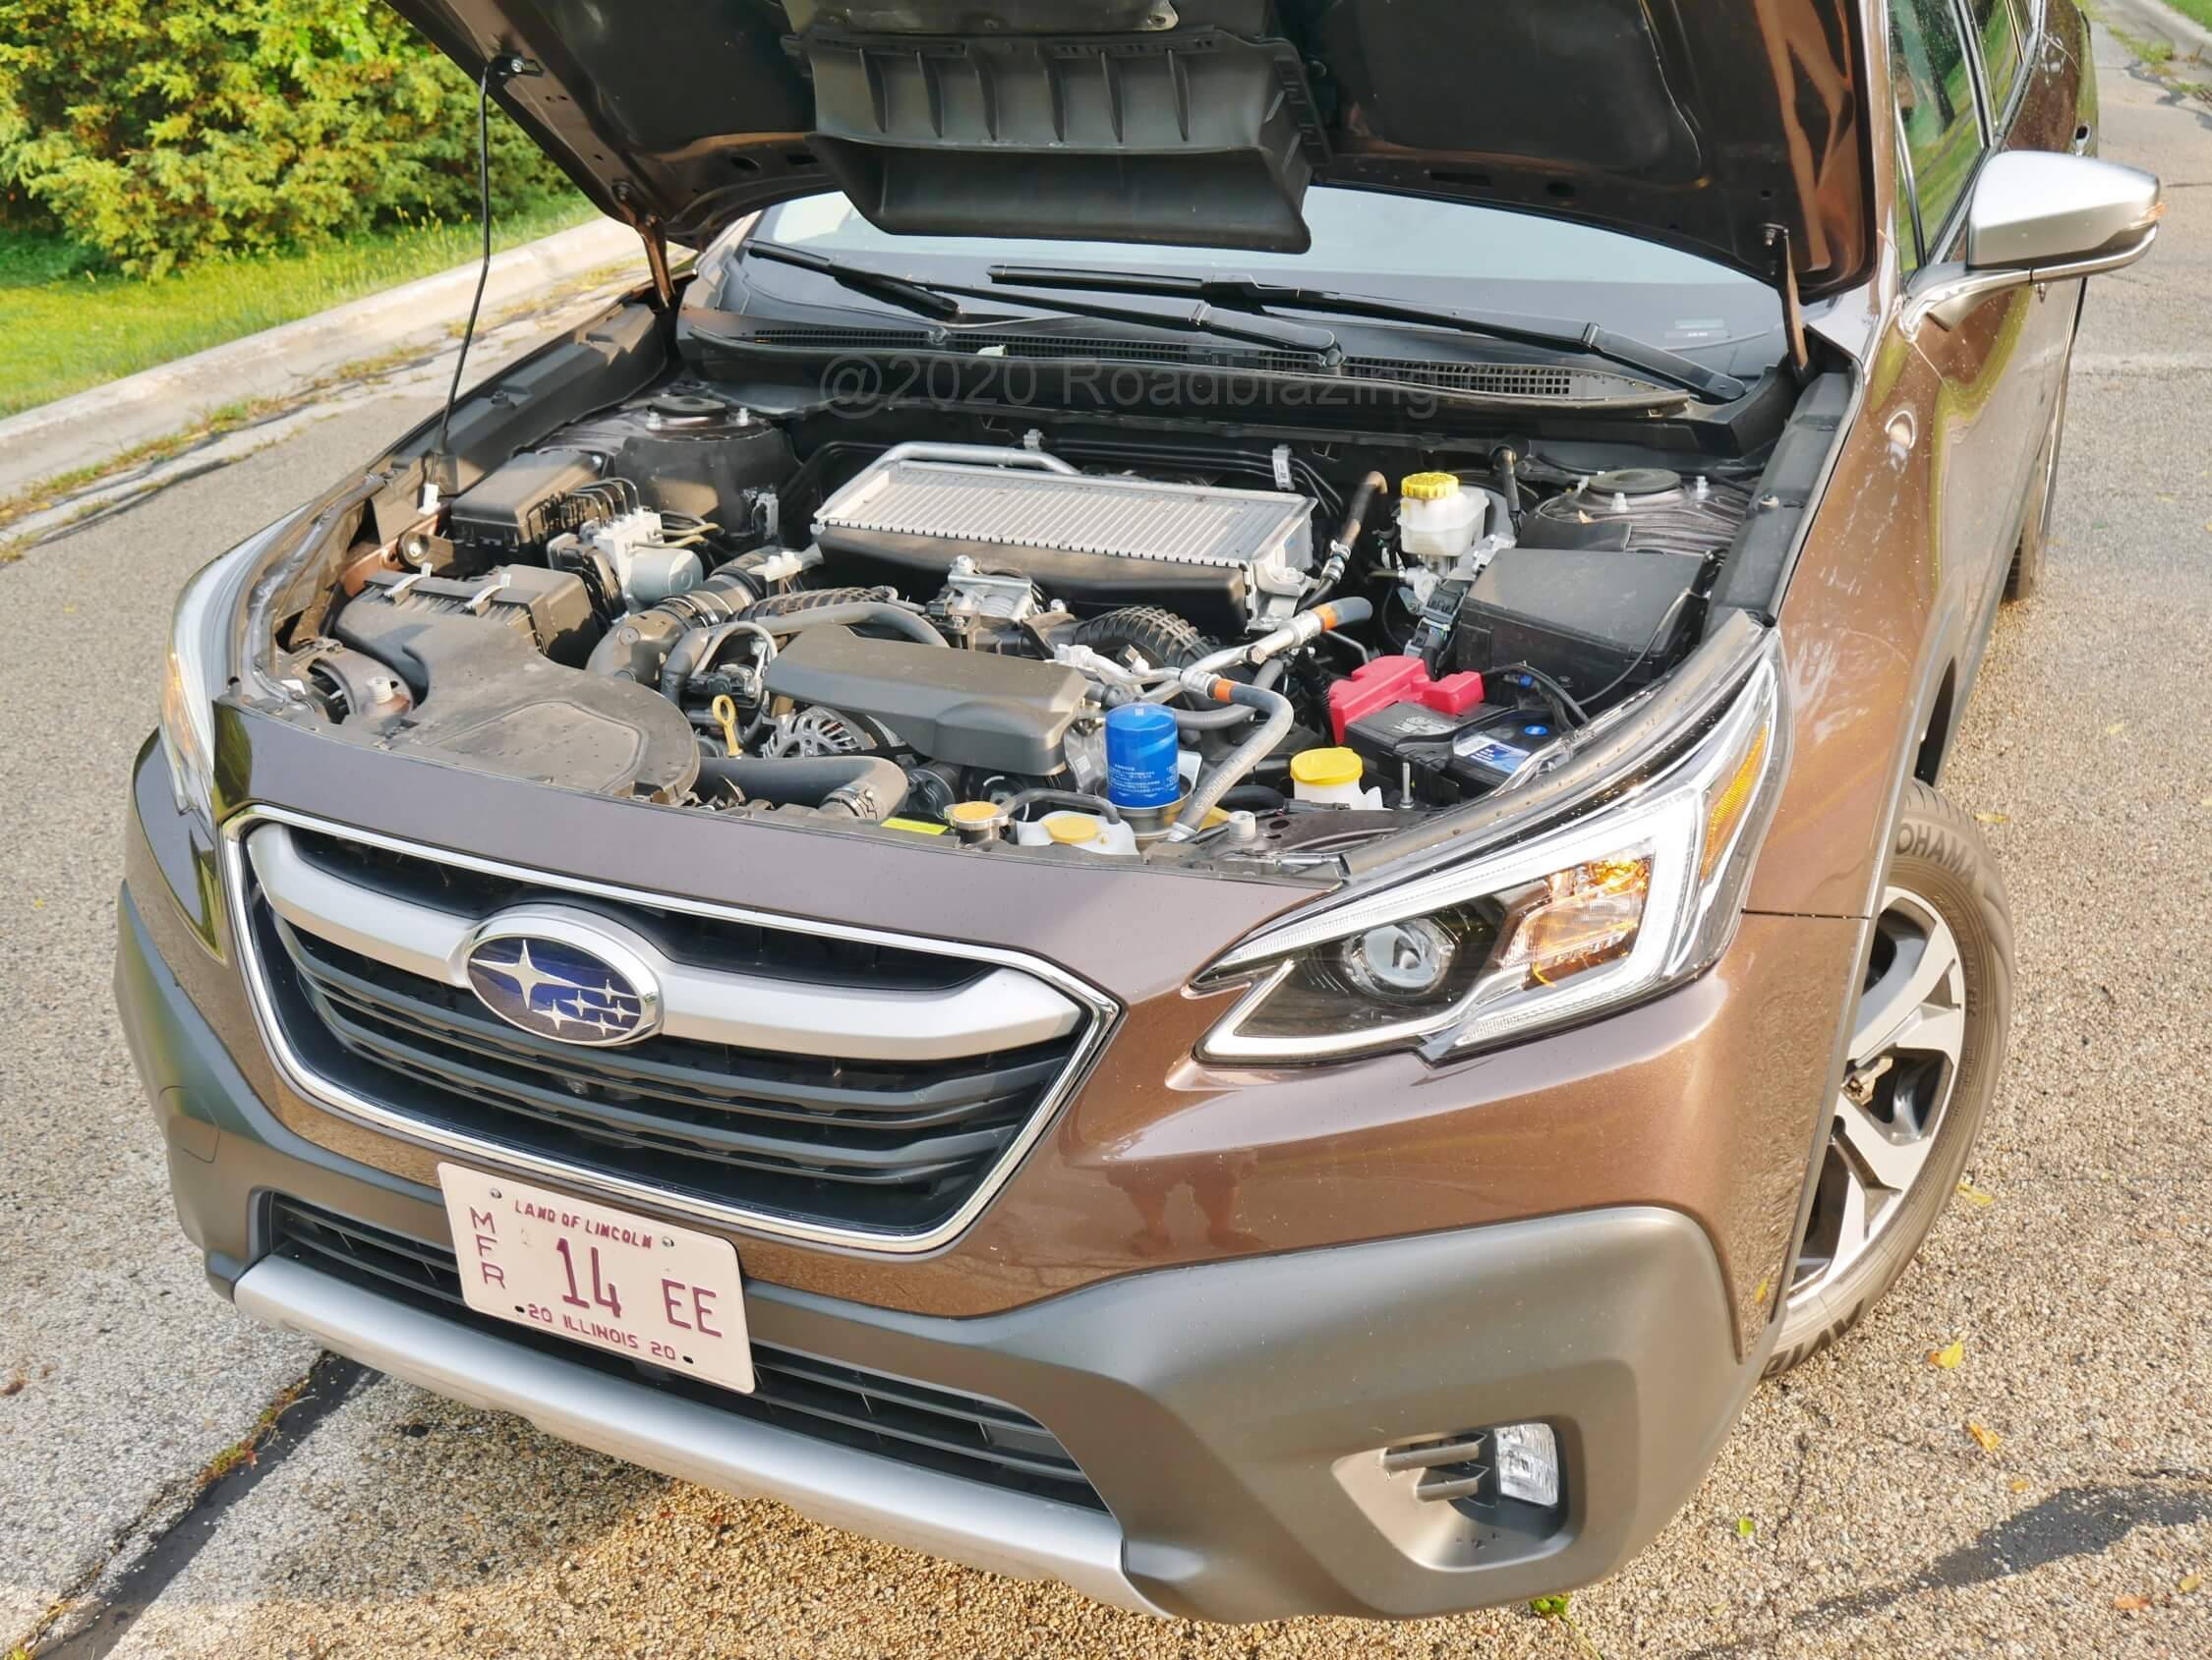 2020 Subaru Outback Touring XT: New for 2020 is the first turbocharged flat-4 installed in a Legacy based Outback wagon.